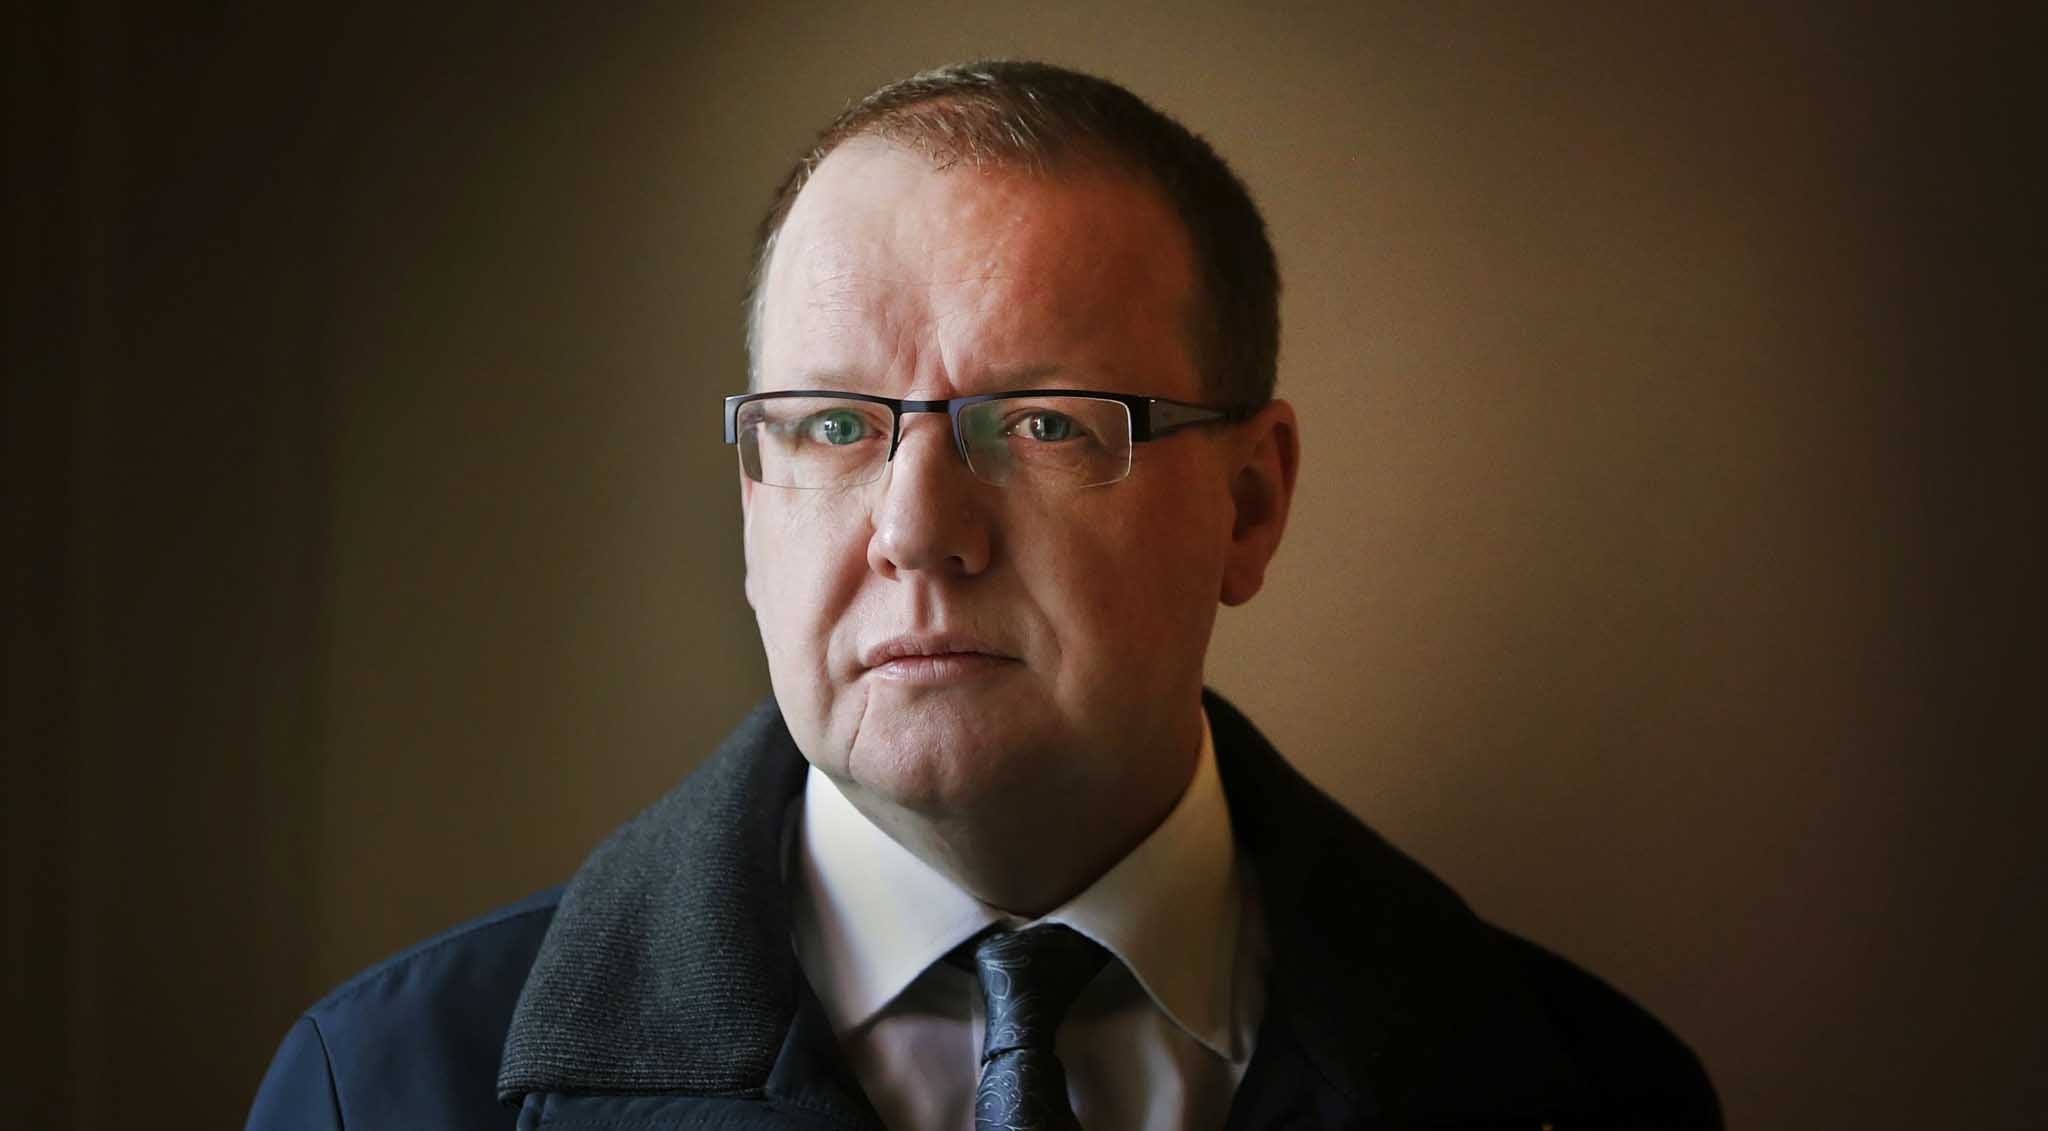 Former Glasgow gangster Paul Ferris promotes a film based on is life ahead of a press conference at Blythswood Square Hotel in Glasgow.